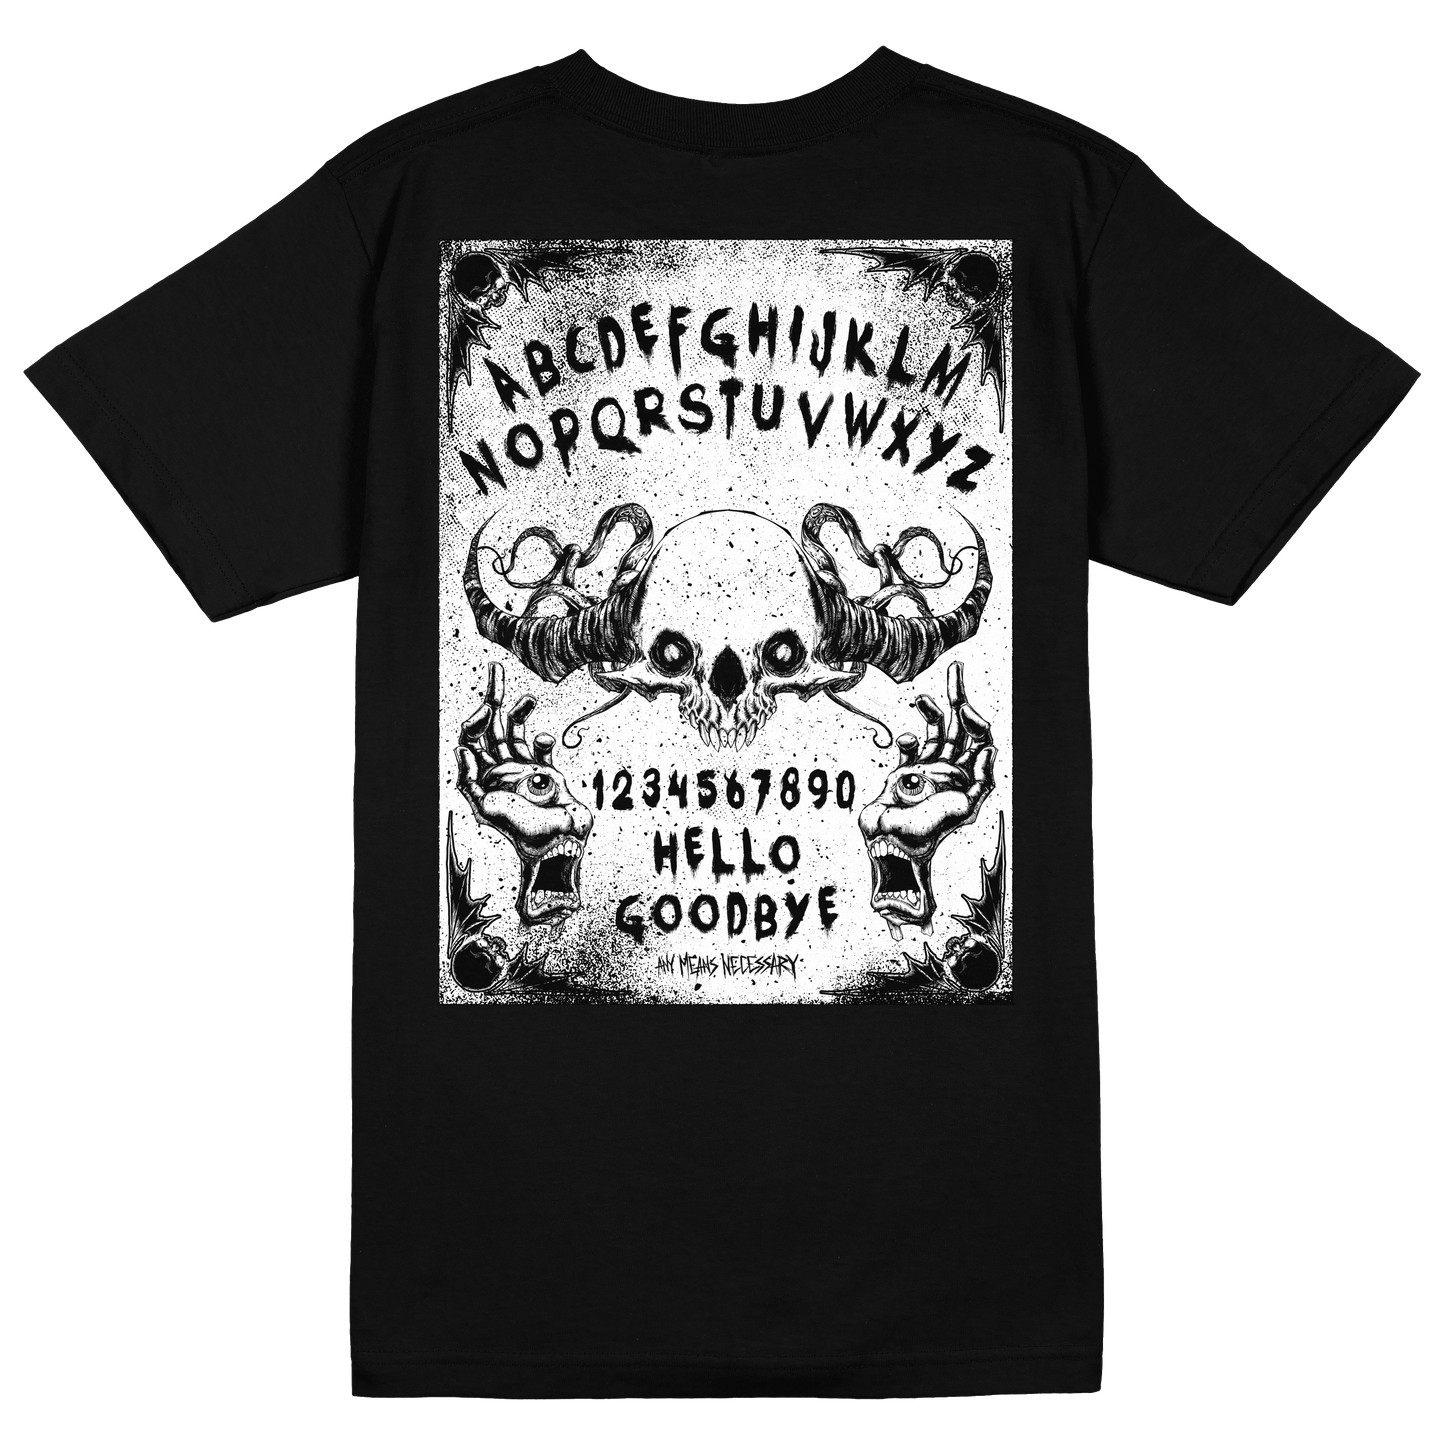 any means necessary shawn coss ouija t shirt black back